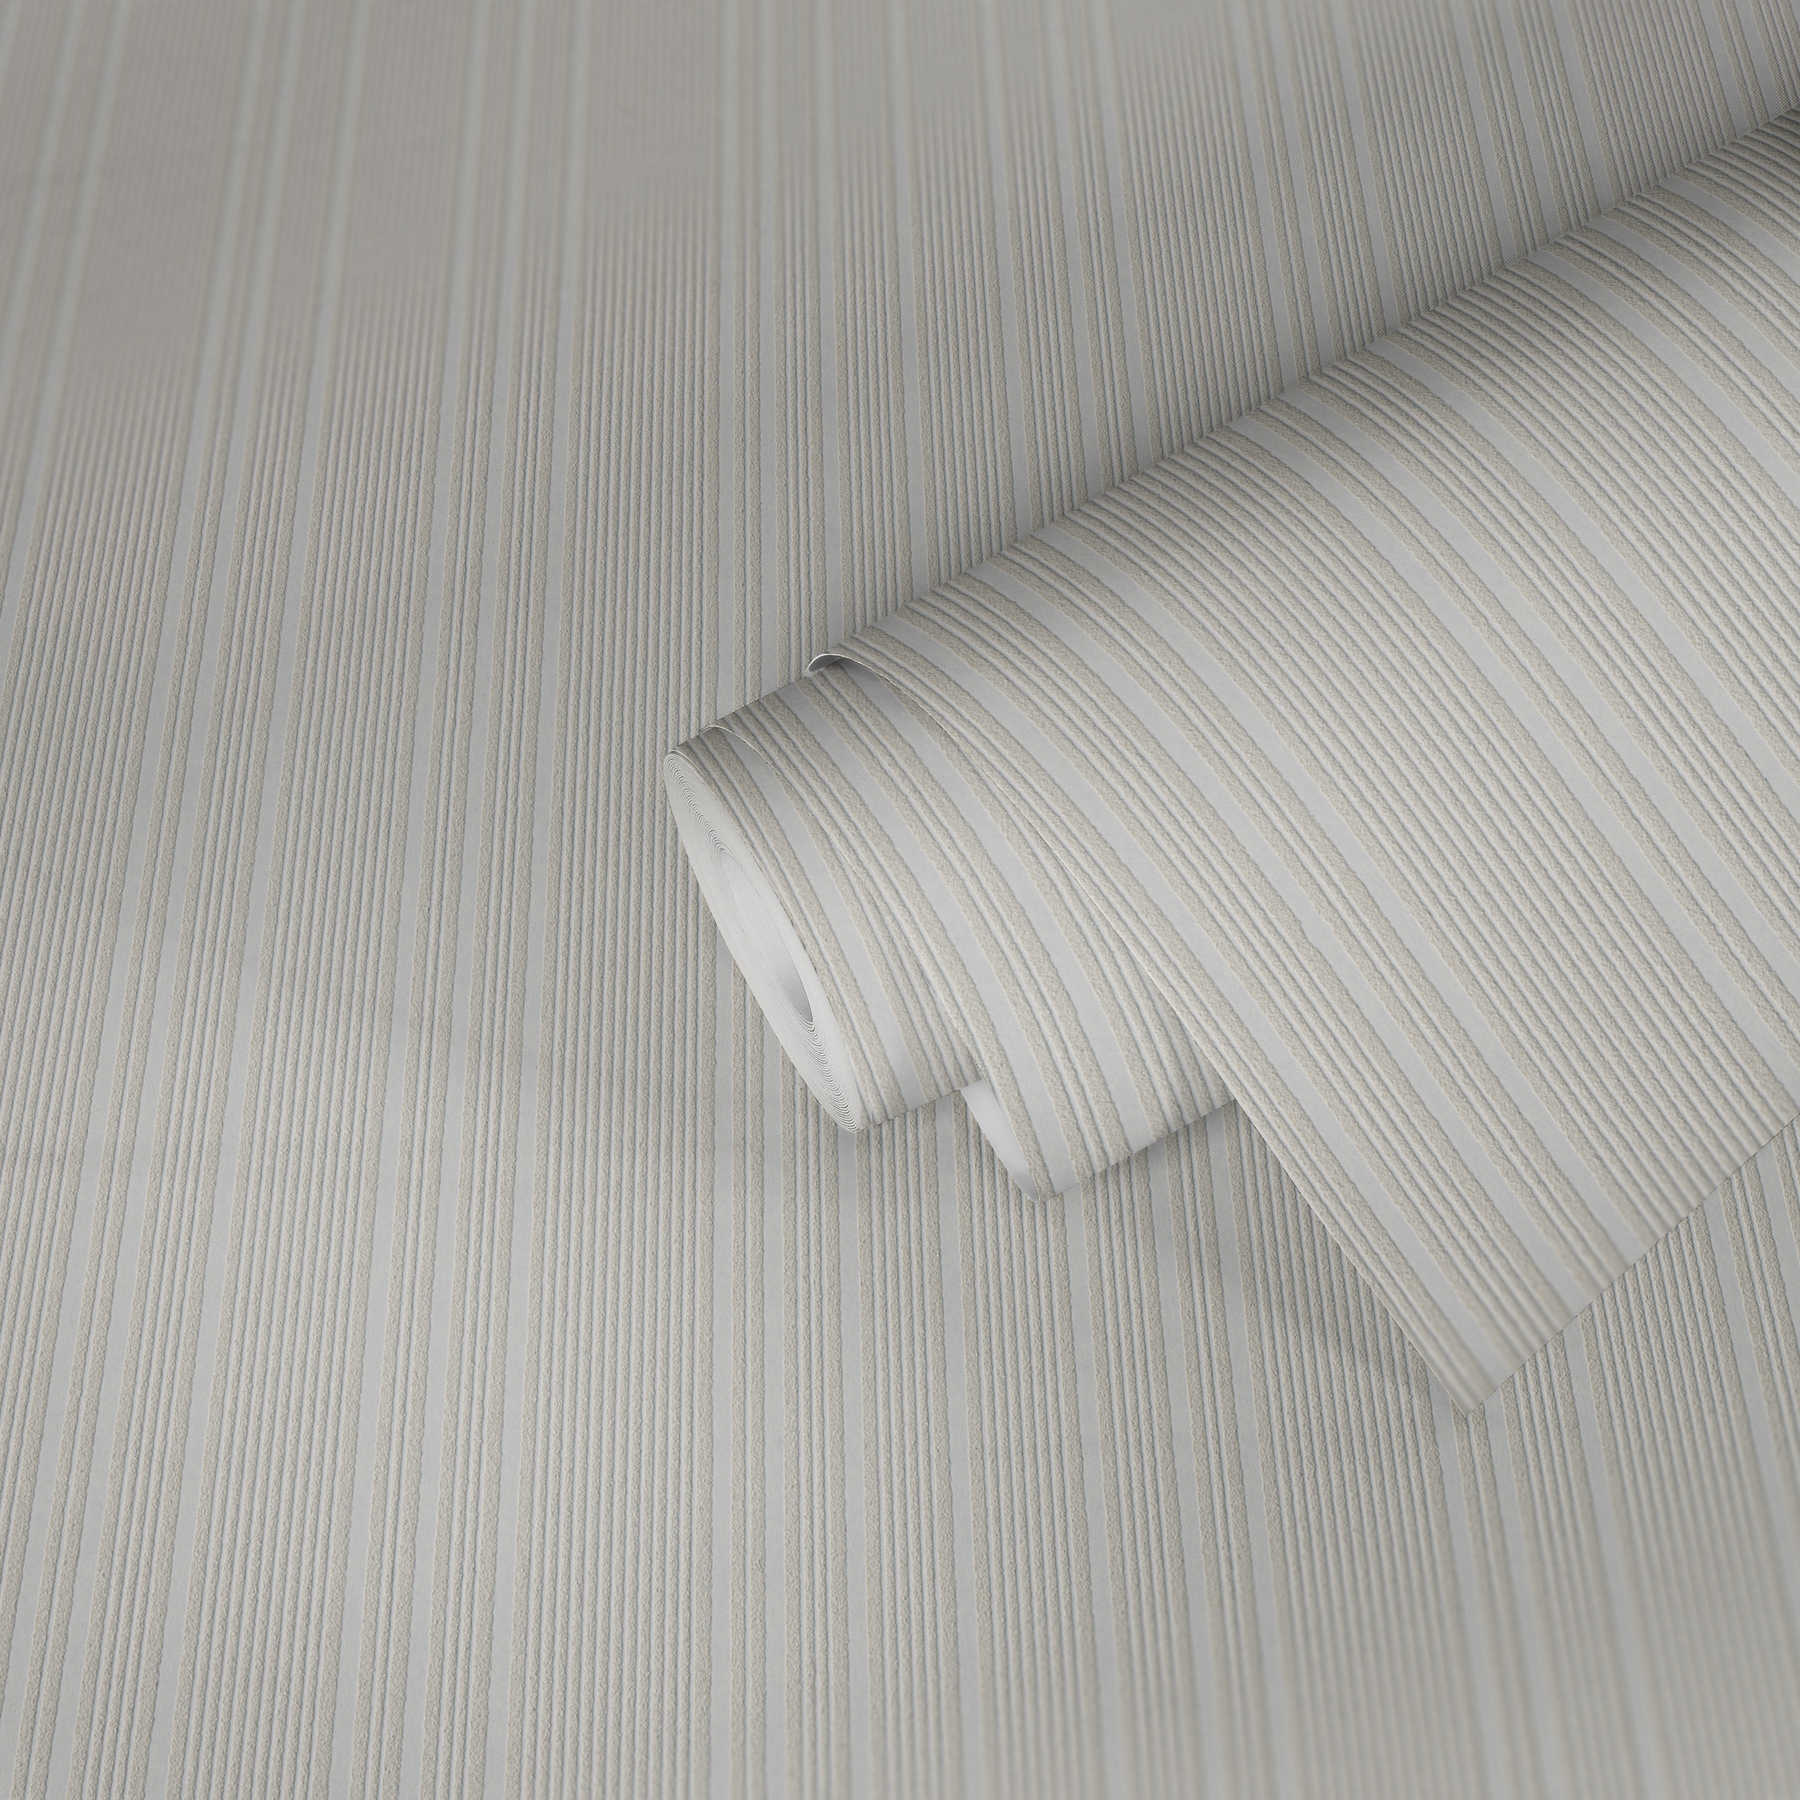             Paintable non-woven wallpaper with line pattern - white
        